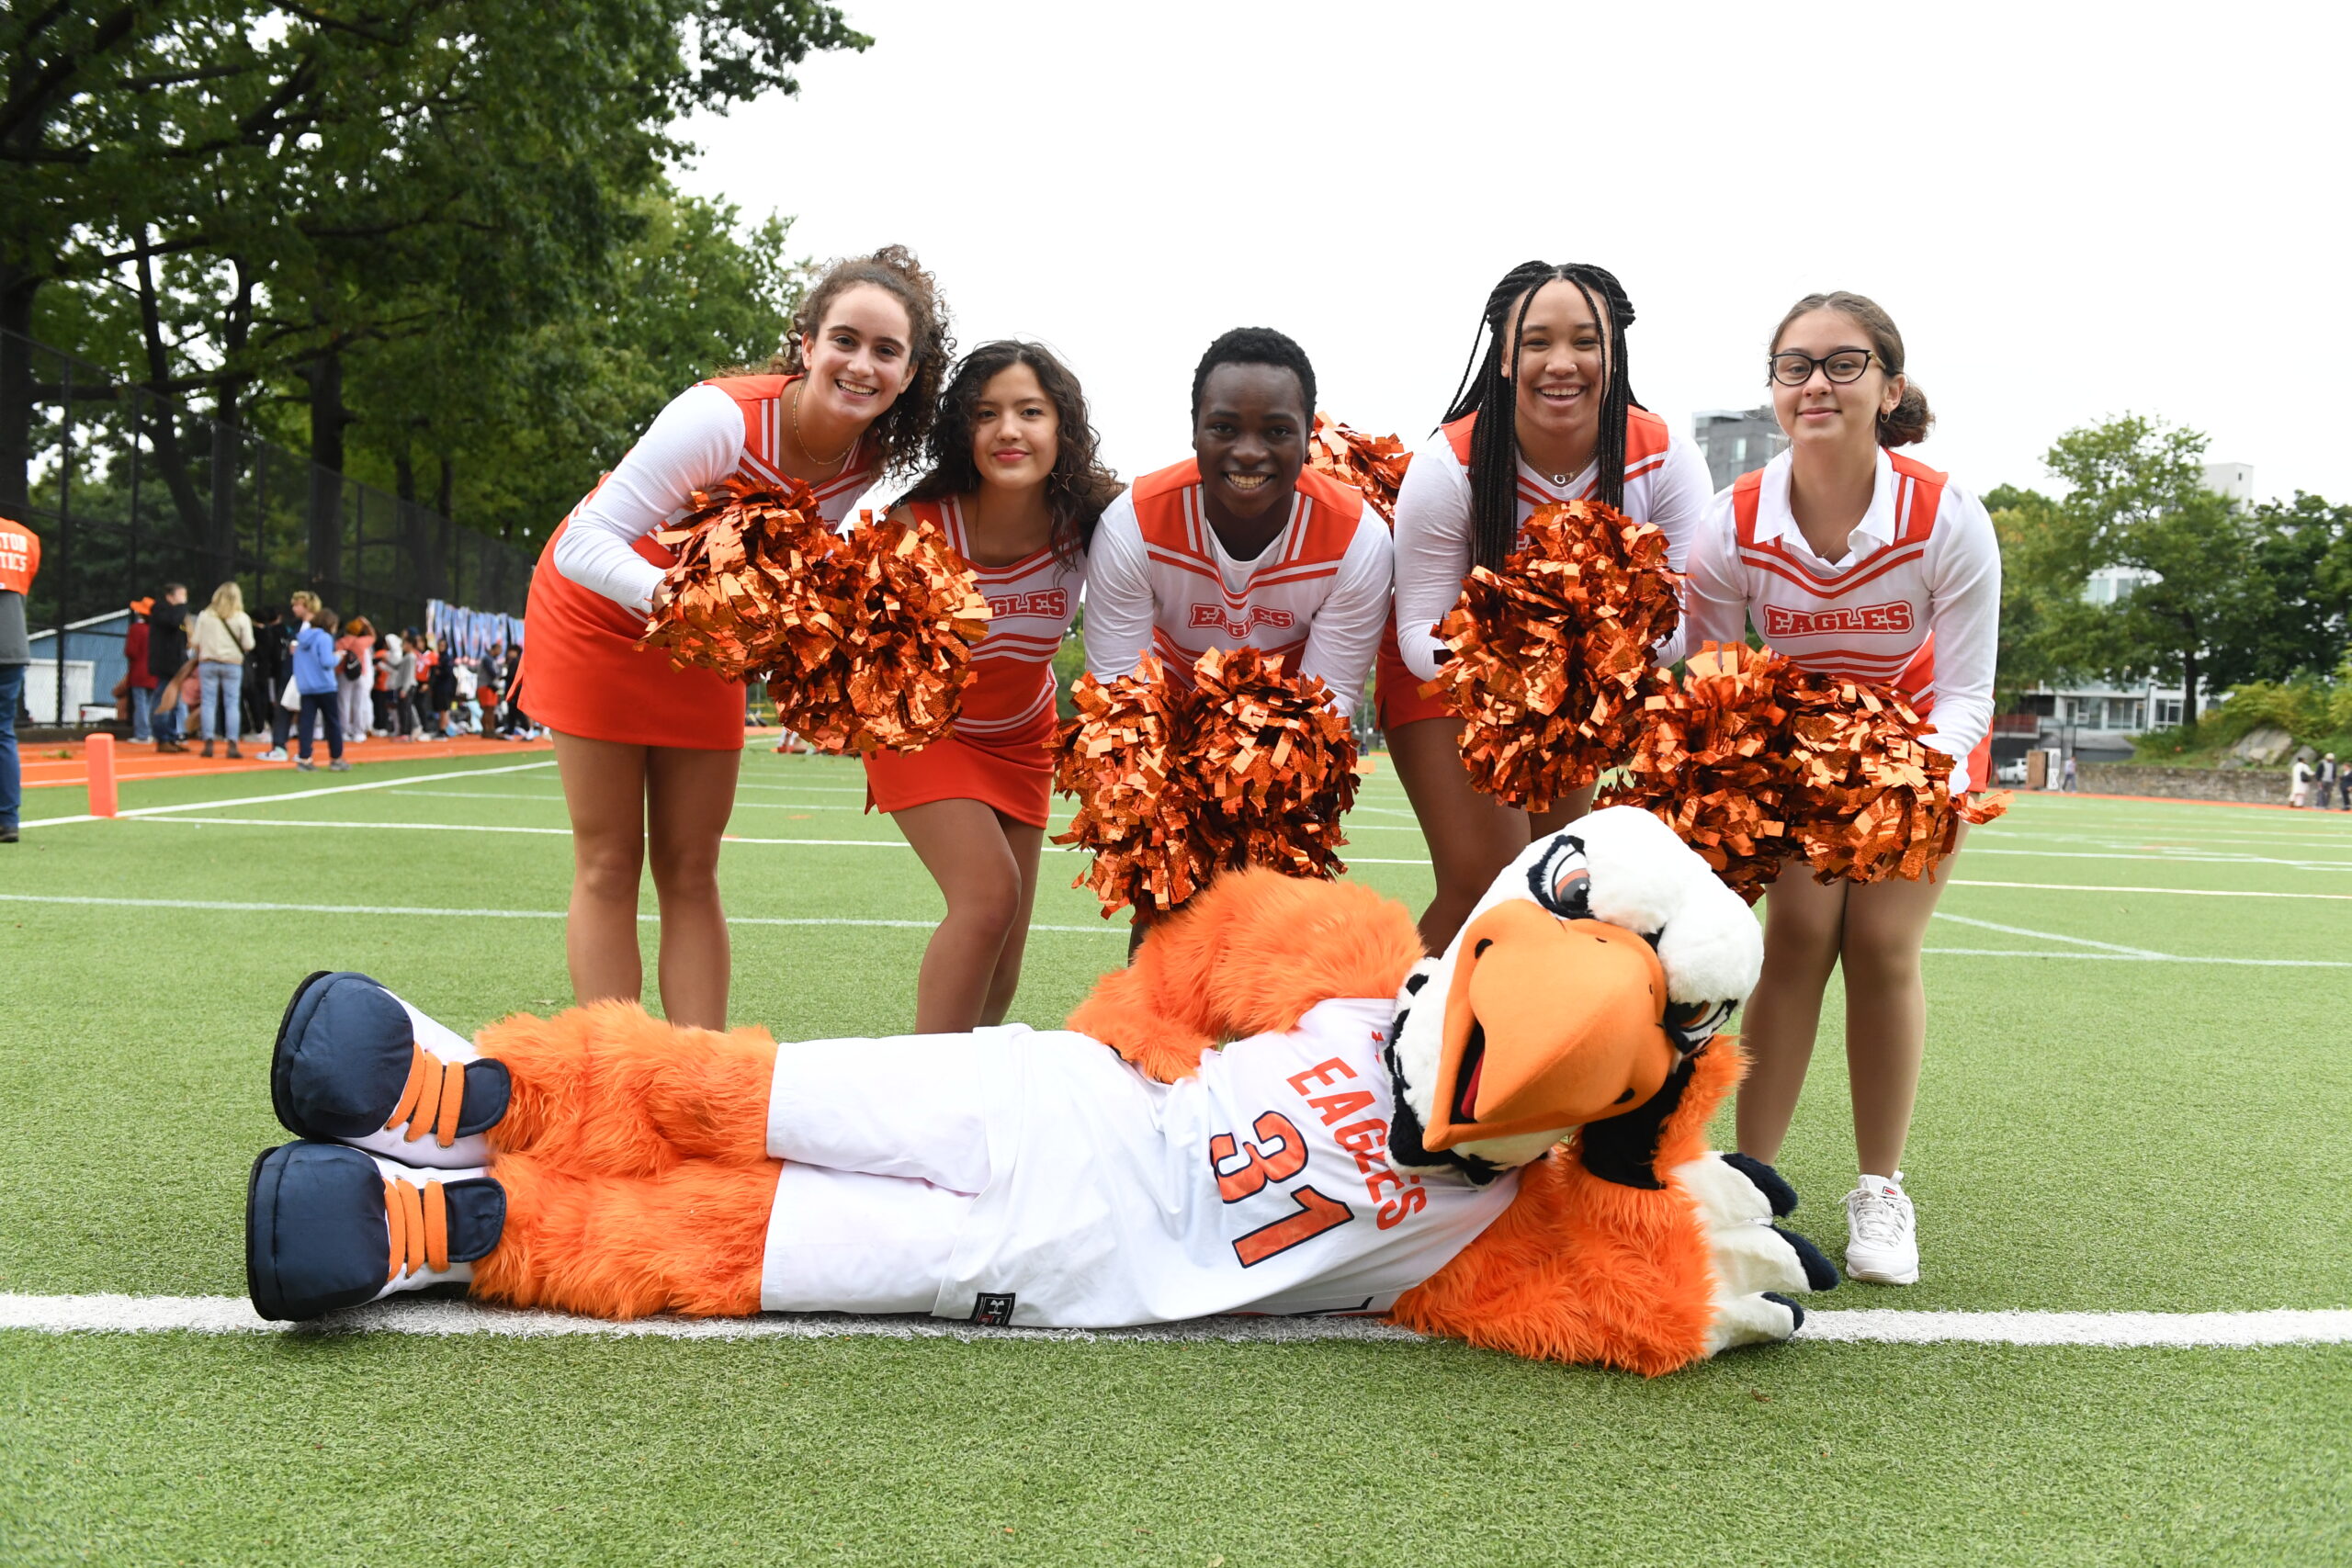 Eagle Cheer poses with shiny orange pompoms with the Eagle